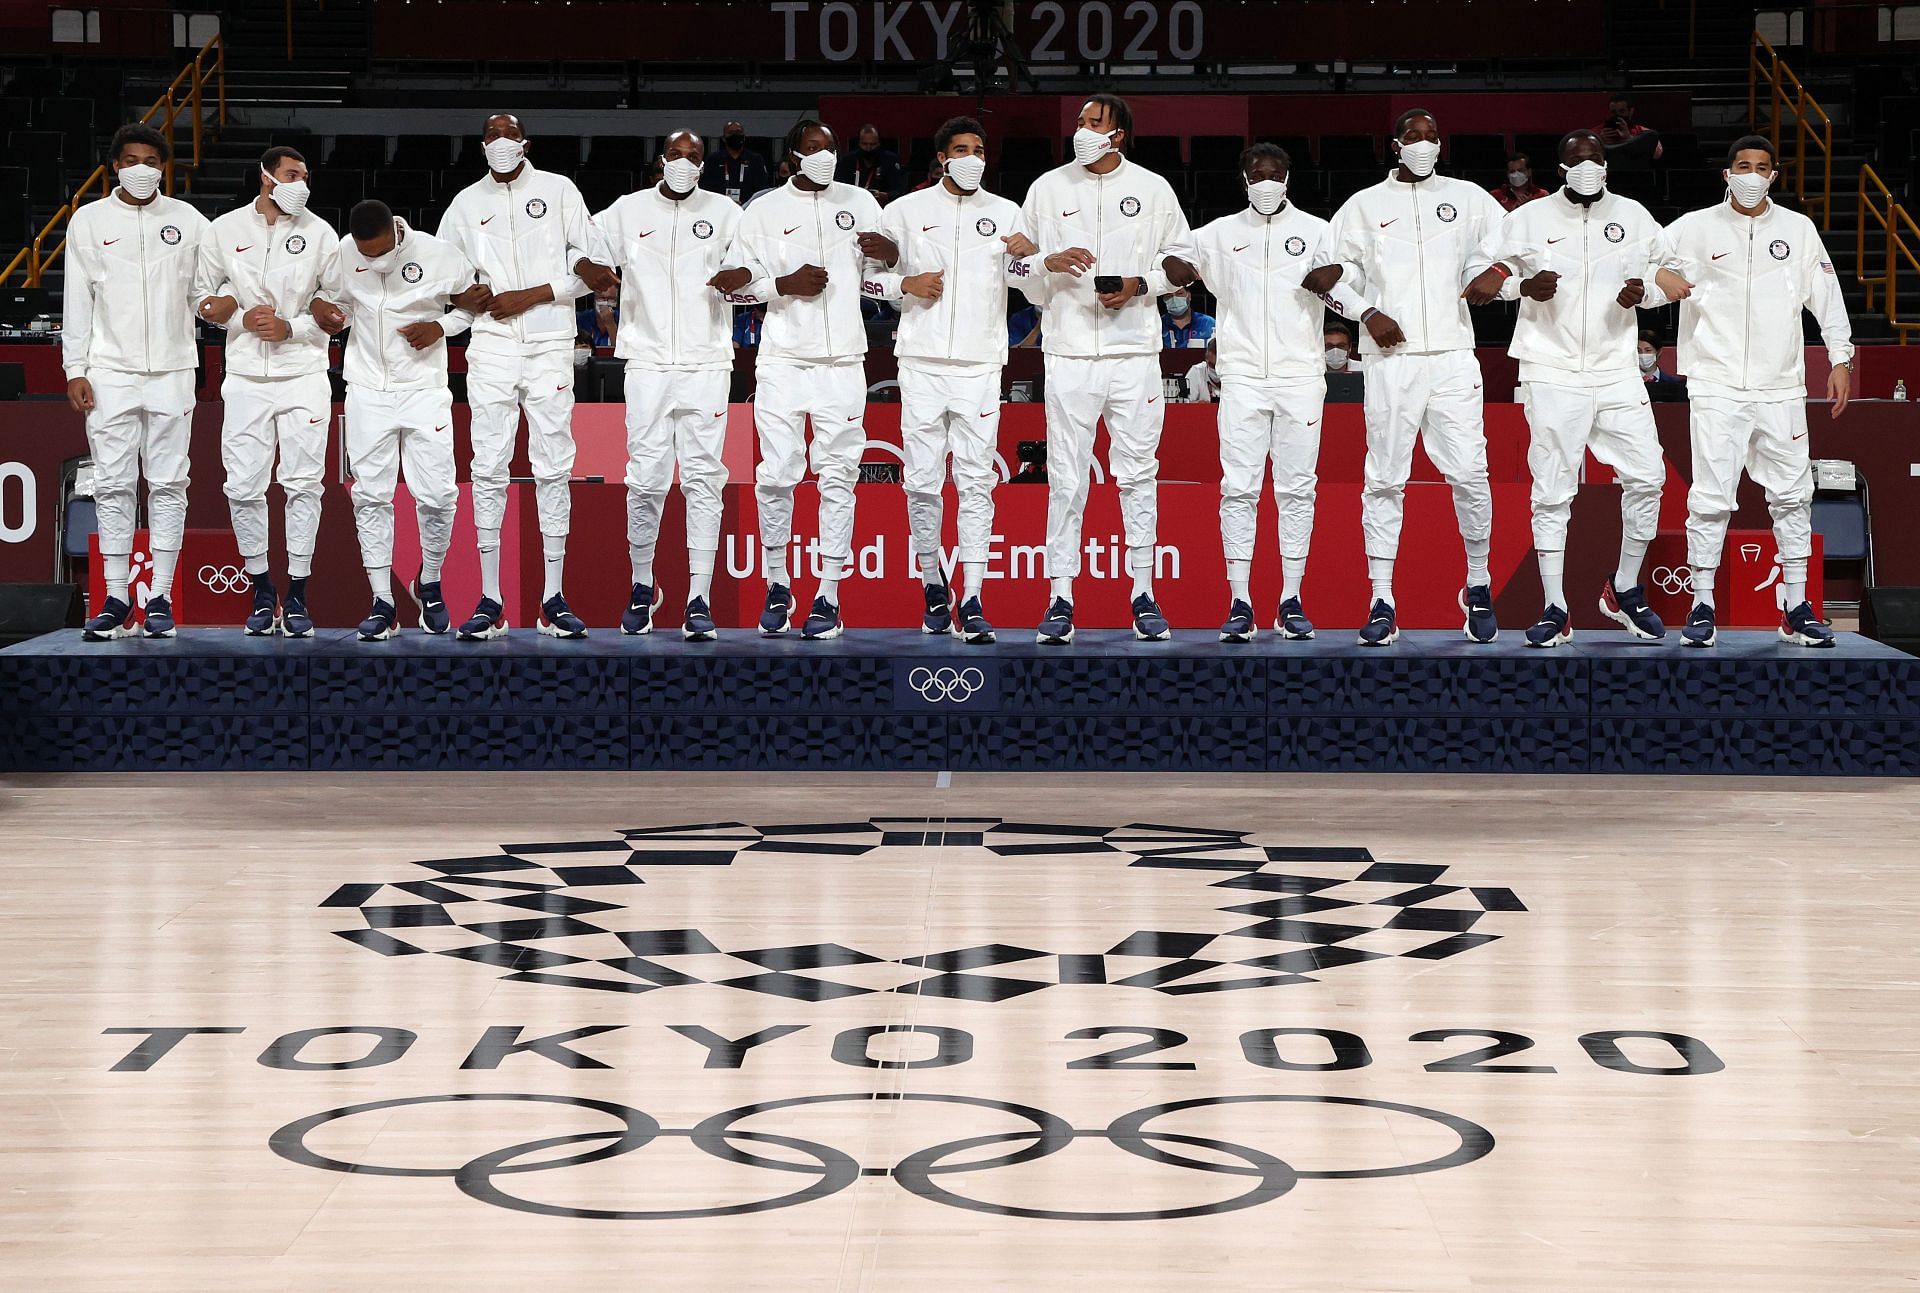 Team United States stands atop the medal stand during the Men&#039;s Basketball medal ceremony at the Tokyo Olympics 2020. (Photo by Kevin C. Cox/Getty Images)